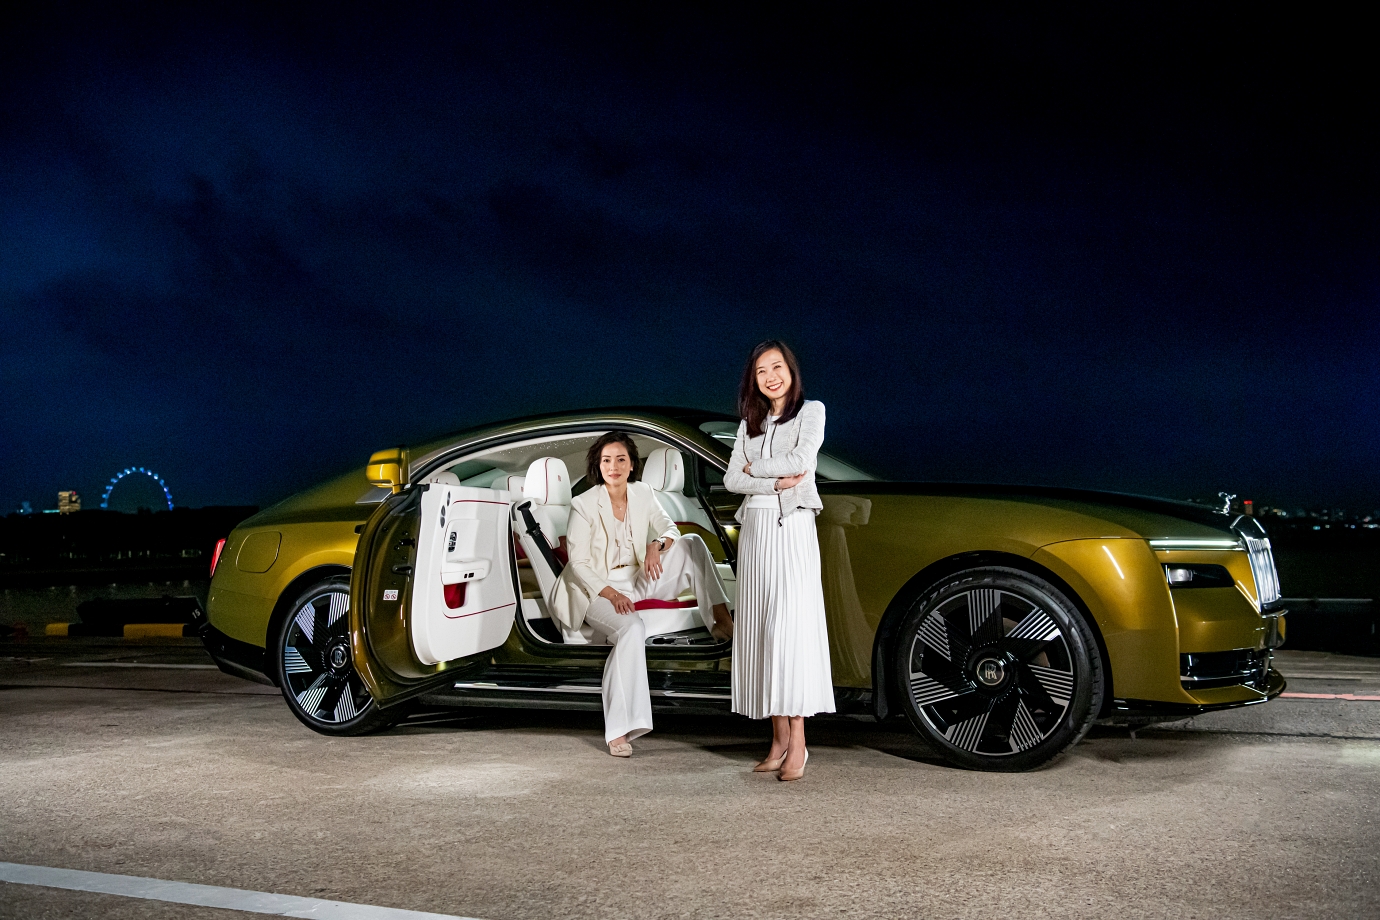 L-R : Ms. Irene Nikkein (Regional Director APAC, Rolls-Royce Motor Cars Asia Pacific)  and Ms. Renee Chua (Managing Director, Rolls-Royce Motor Cars Singapore)